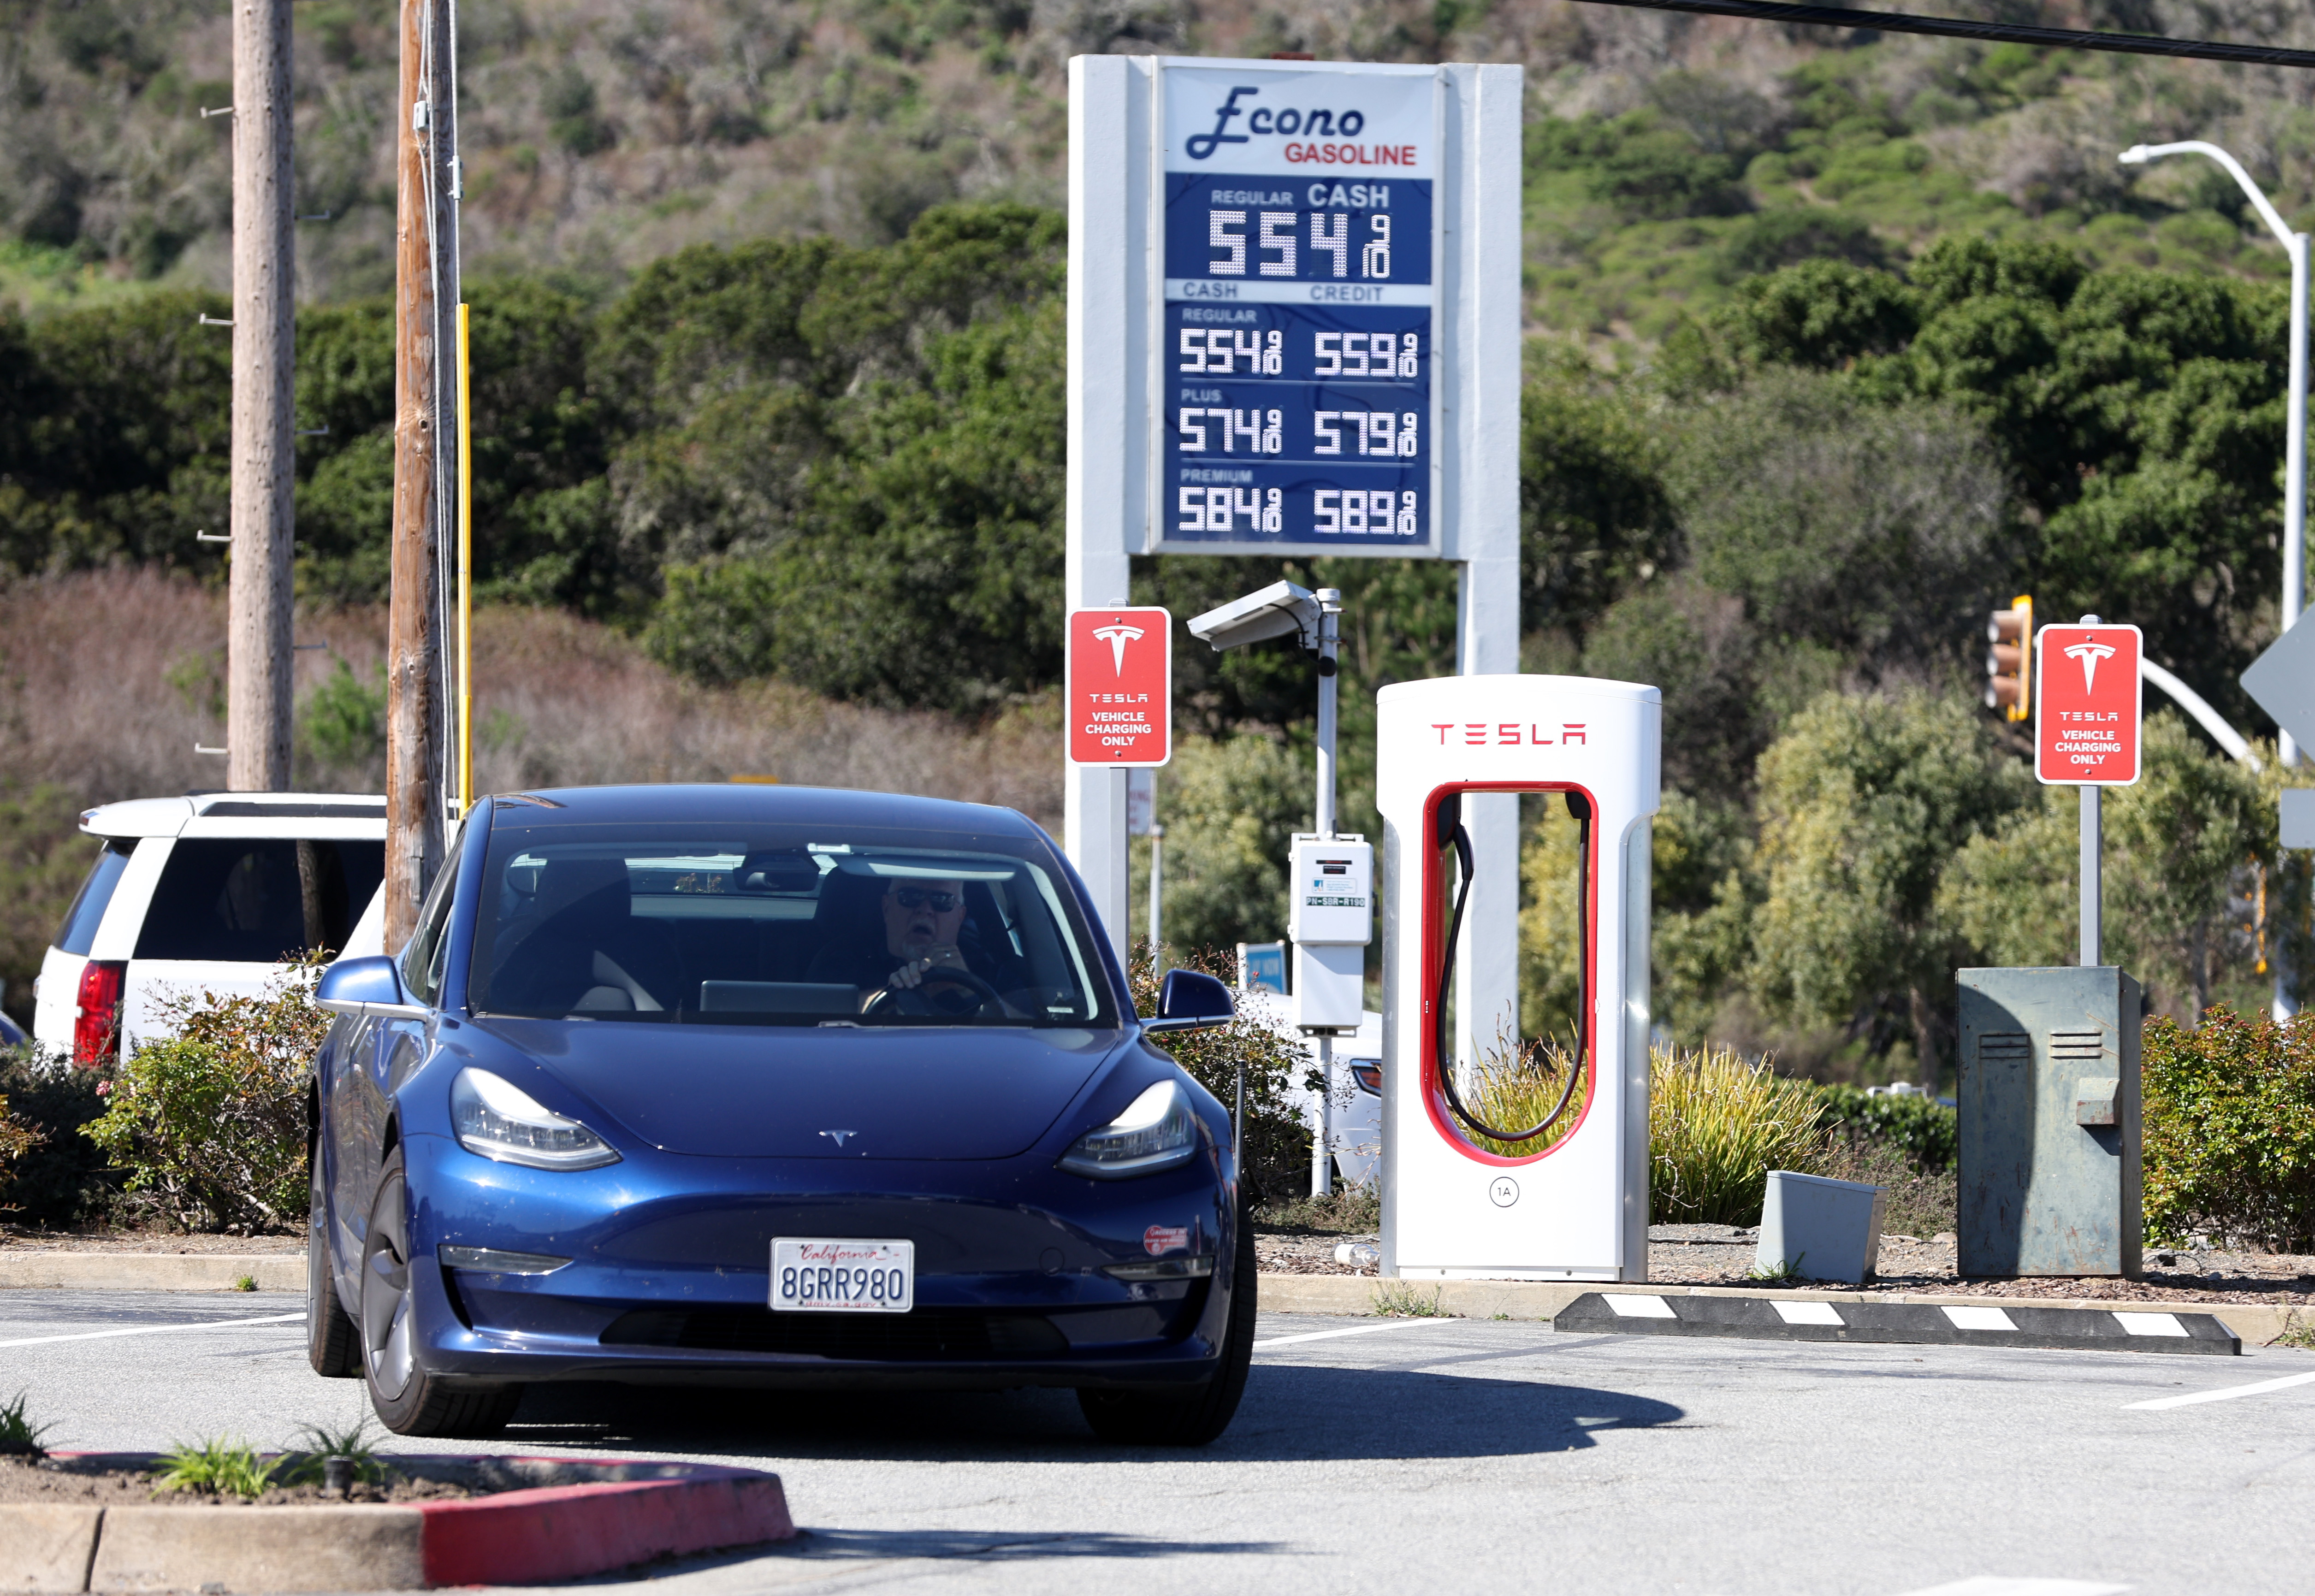 A Tesla car leaves a Supercharger station after recharging its battery on March 10, 2022, in San Bruno, California.